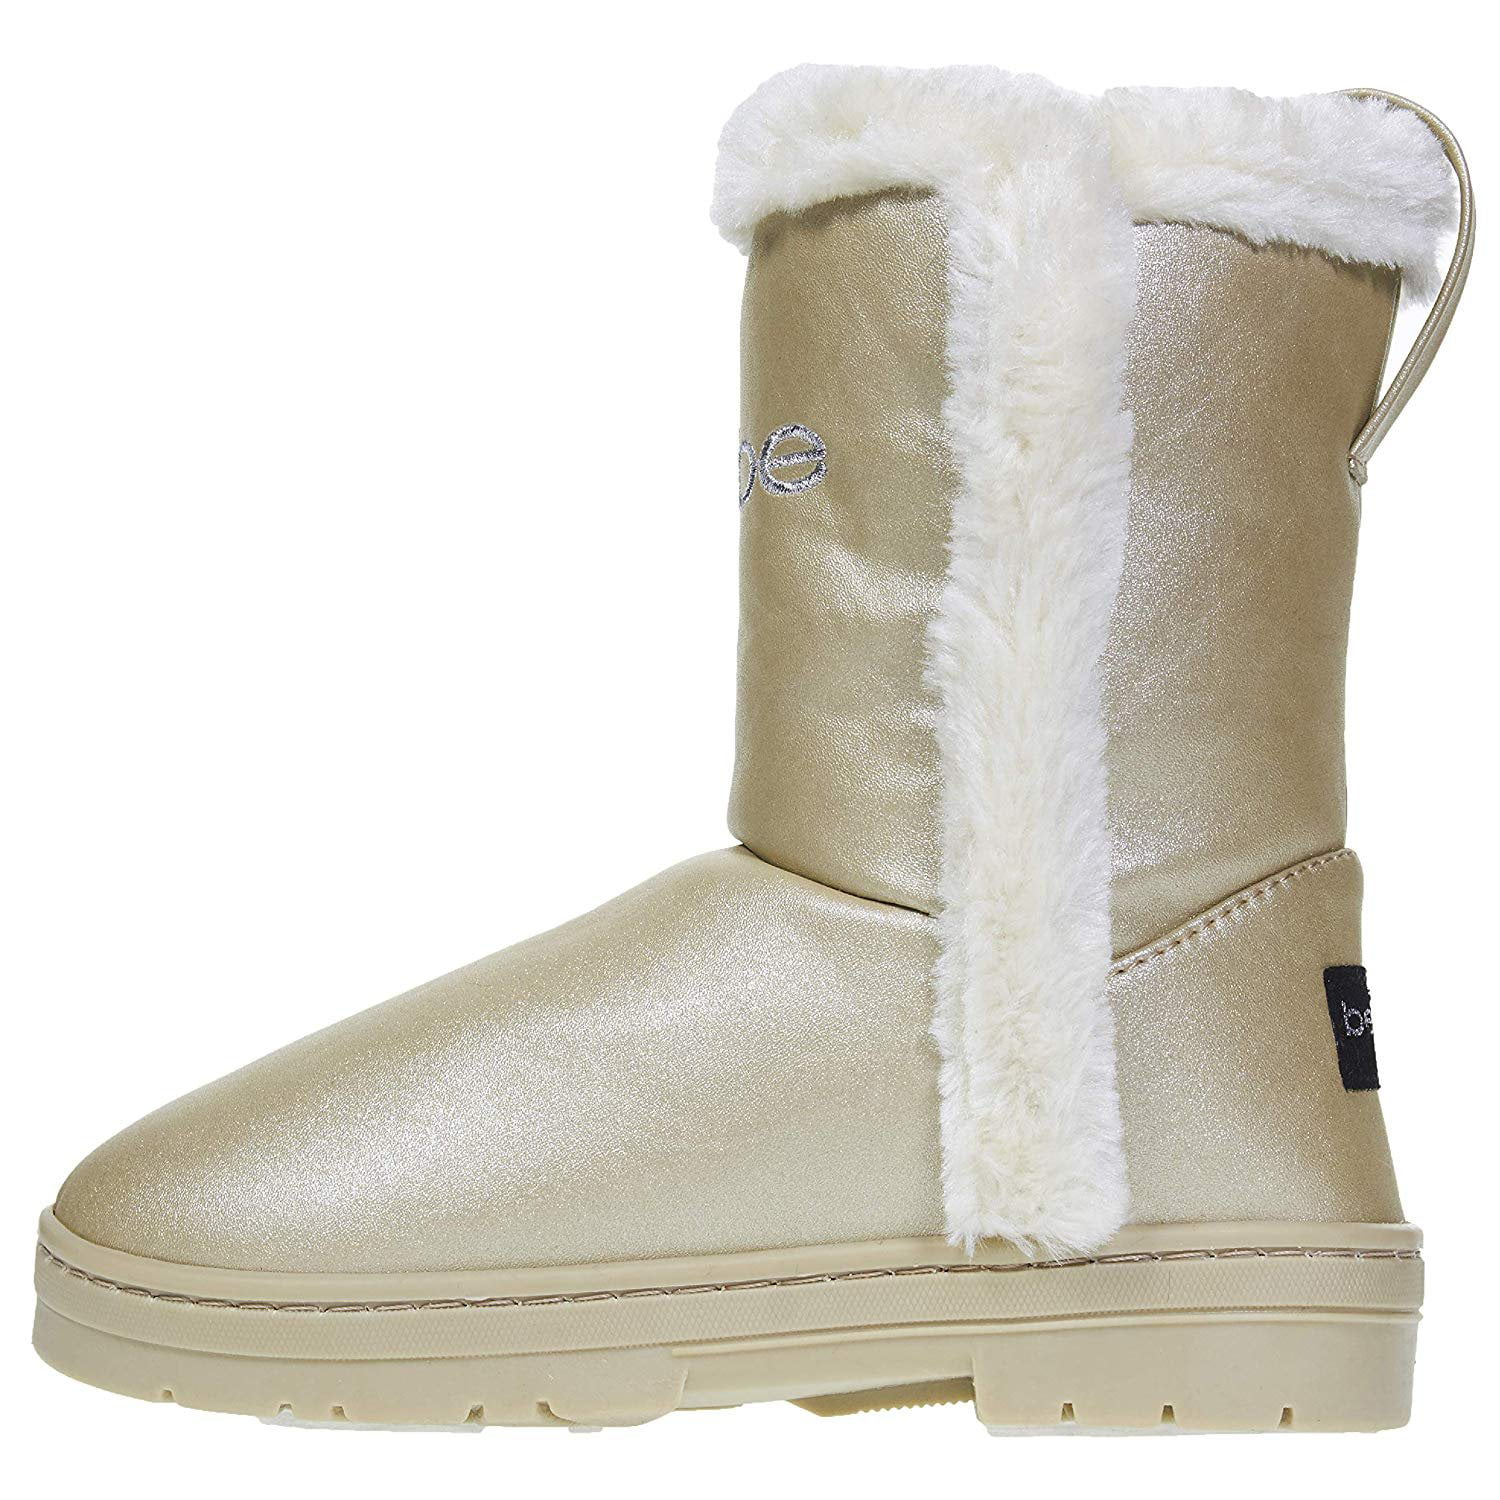 bebe Girls Pearlized Winter Boots Size 